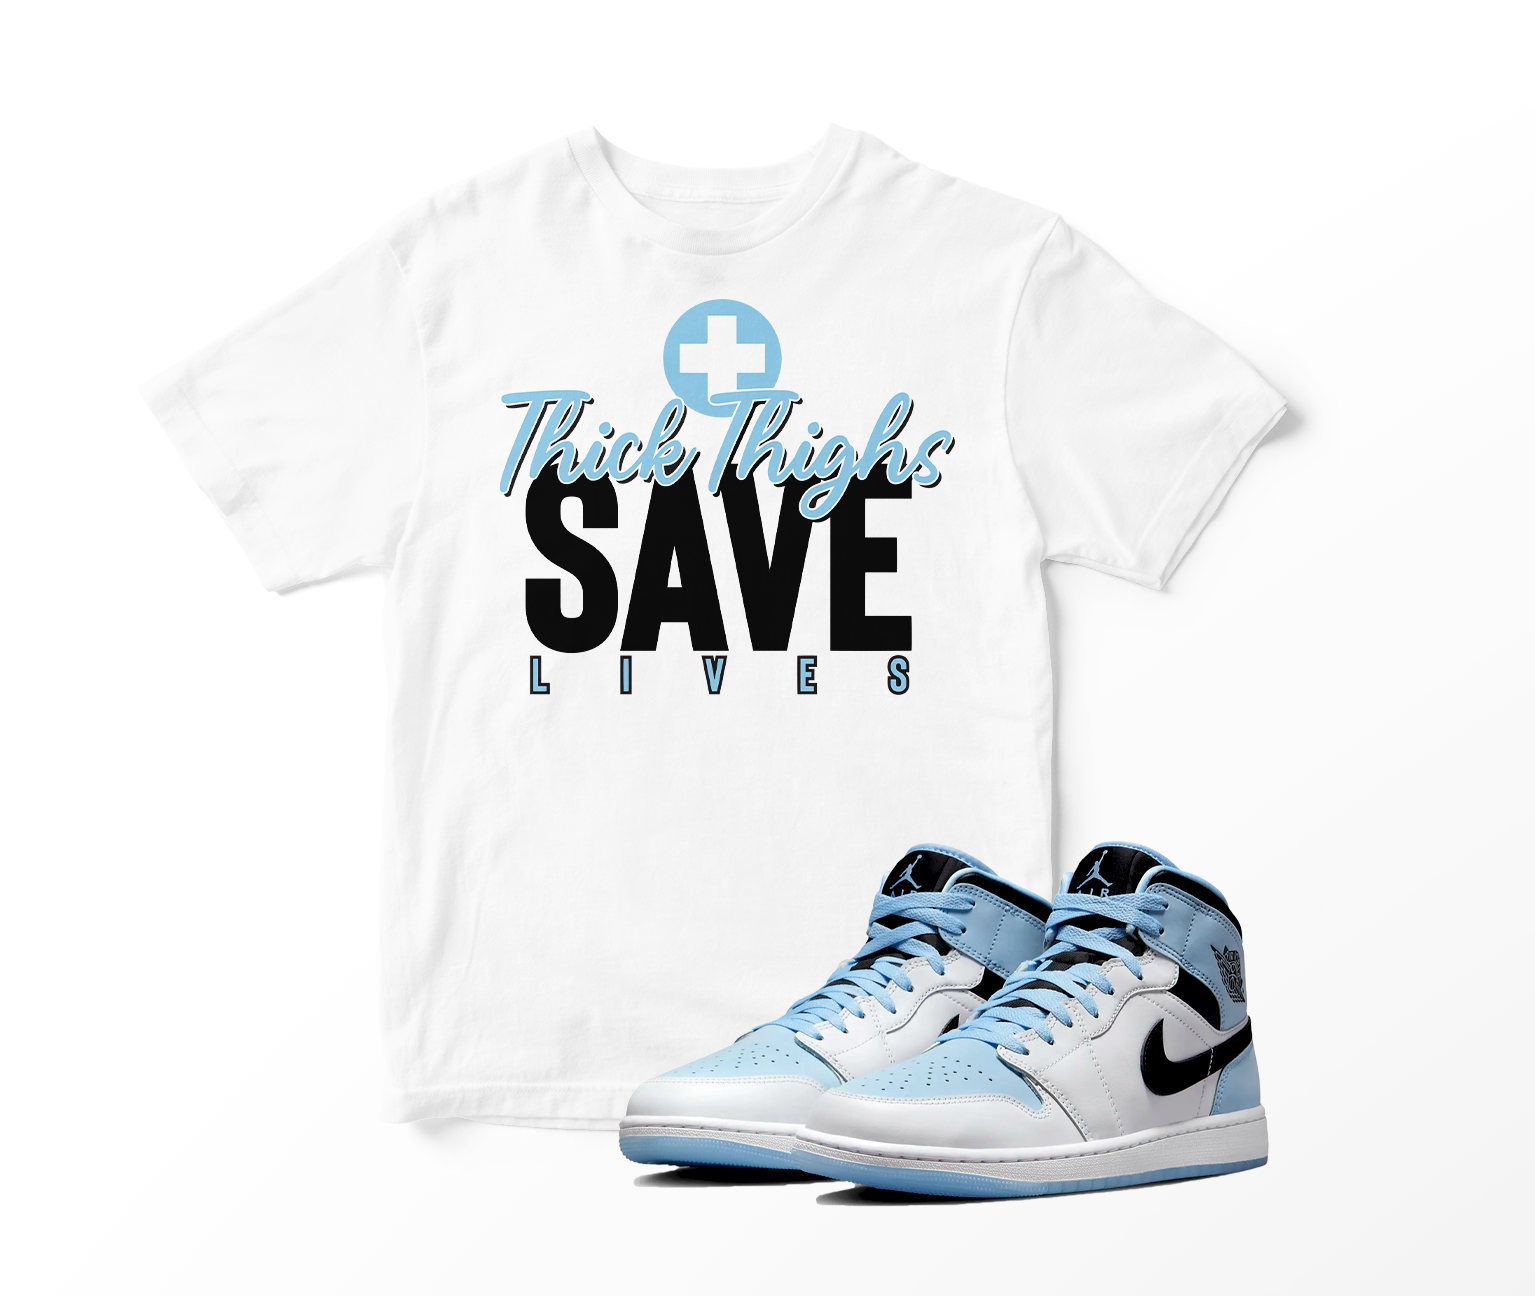 'Thick Thighs Save Lives' Custom Graphic Short Sleeve T-Shirt To Match Air Jordan 1 White Ice